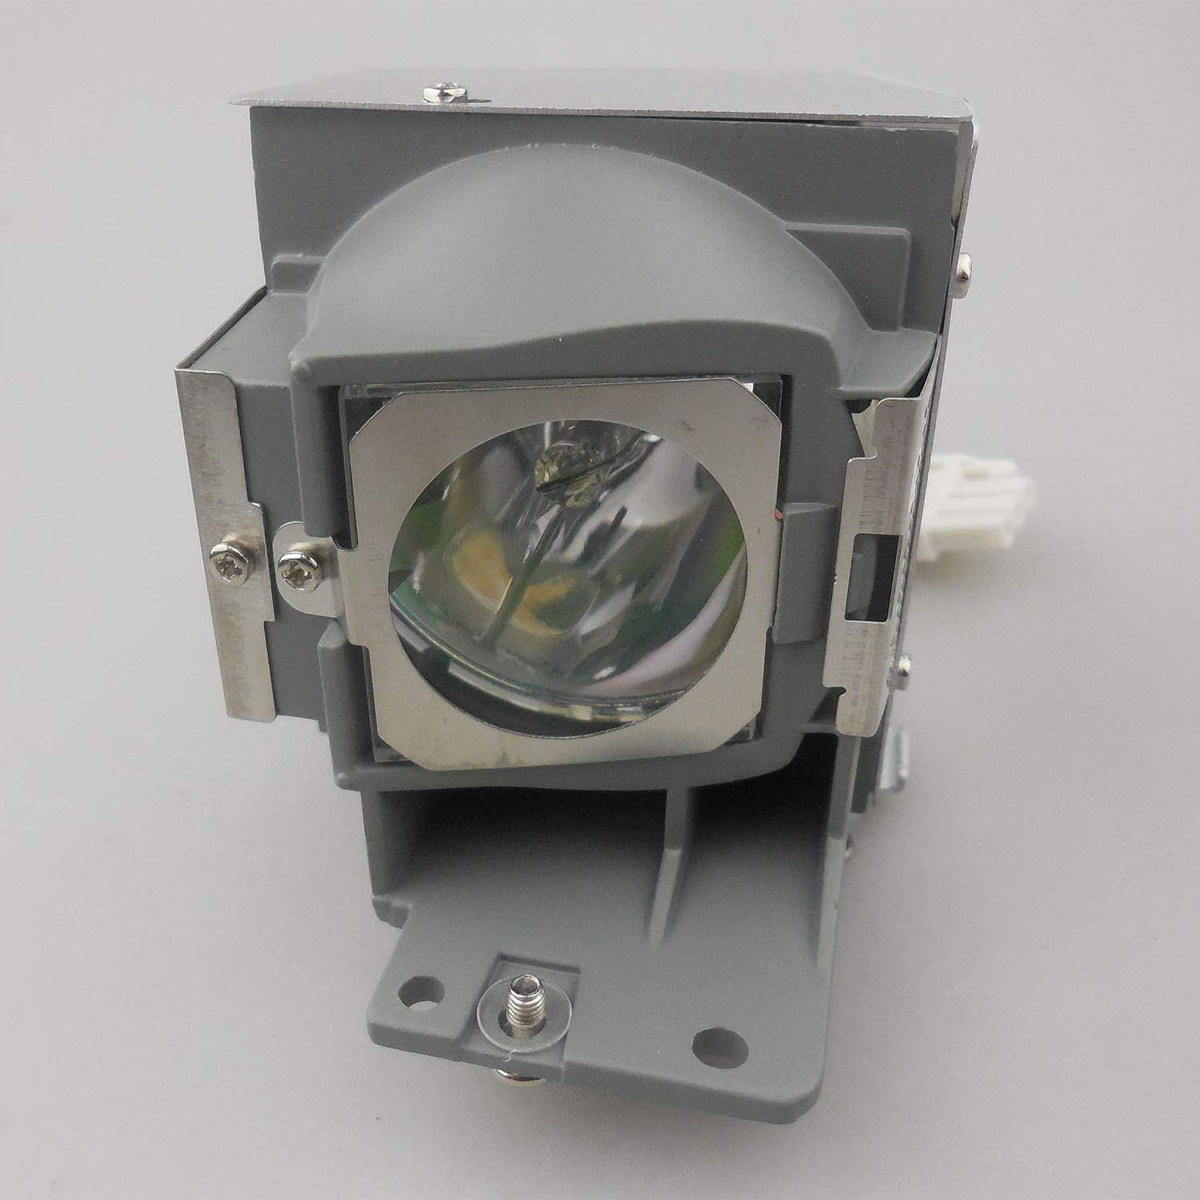 Replacement Projector lamp RLC-078 For VIEWSONIC PJD5232L PJD5132 PJD5134